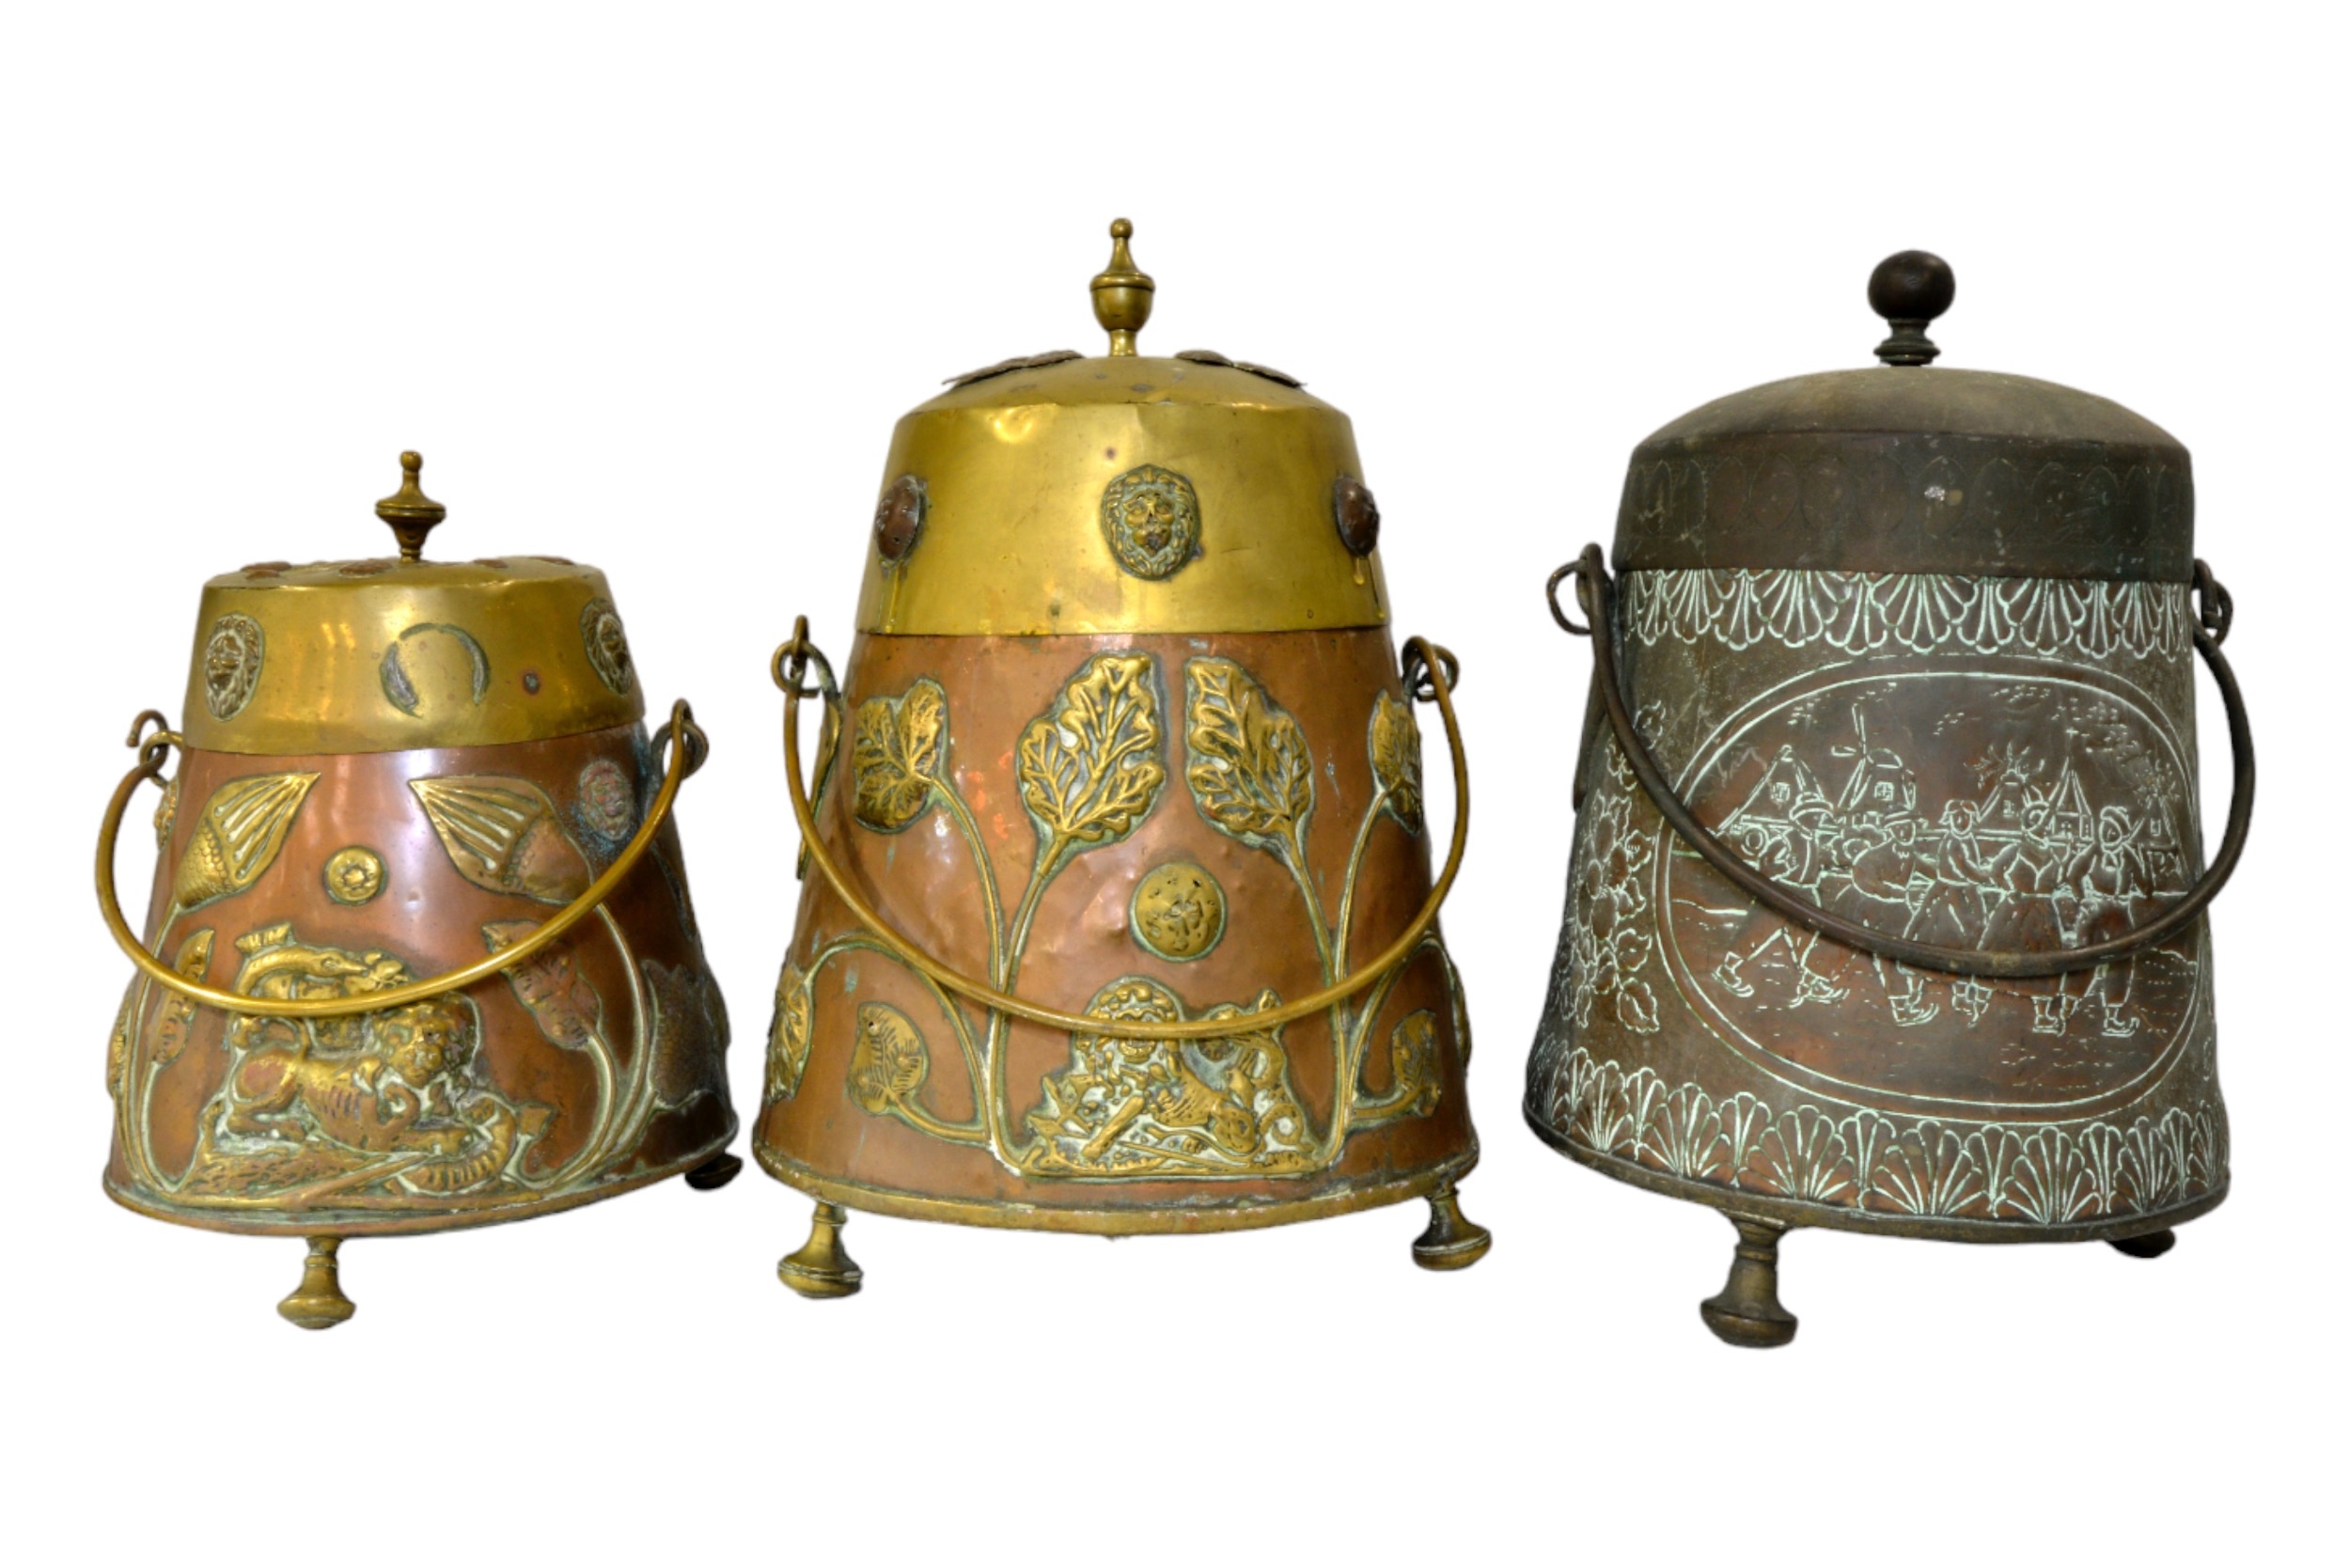 A DUTCH COPPER AND BRASS LIDDED COAL BUCKET  decorated with floral and animal appliques, another